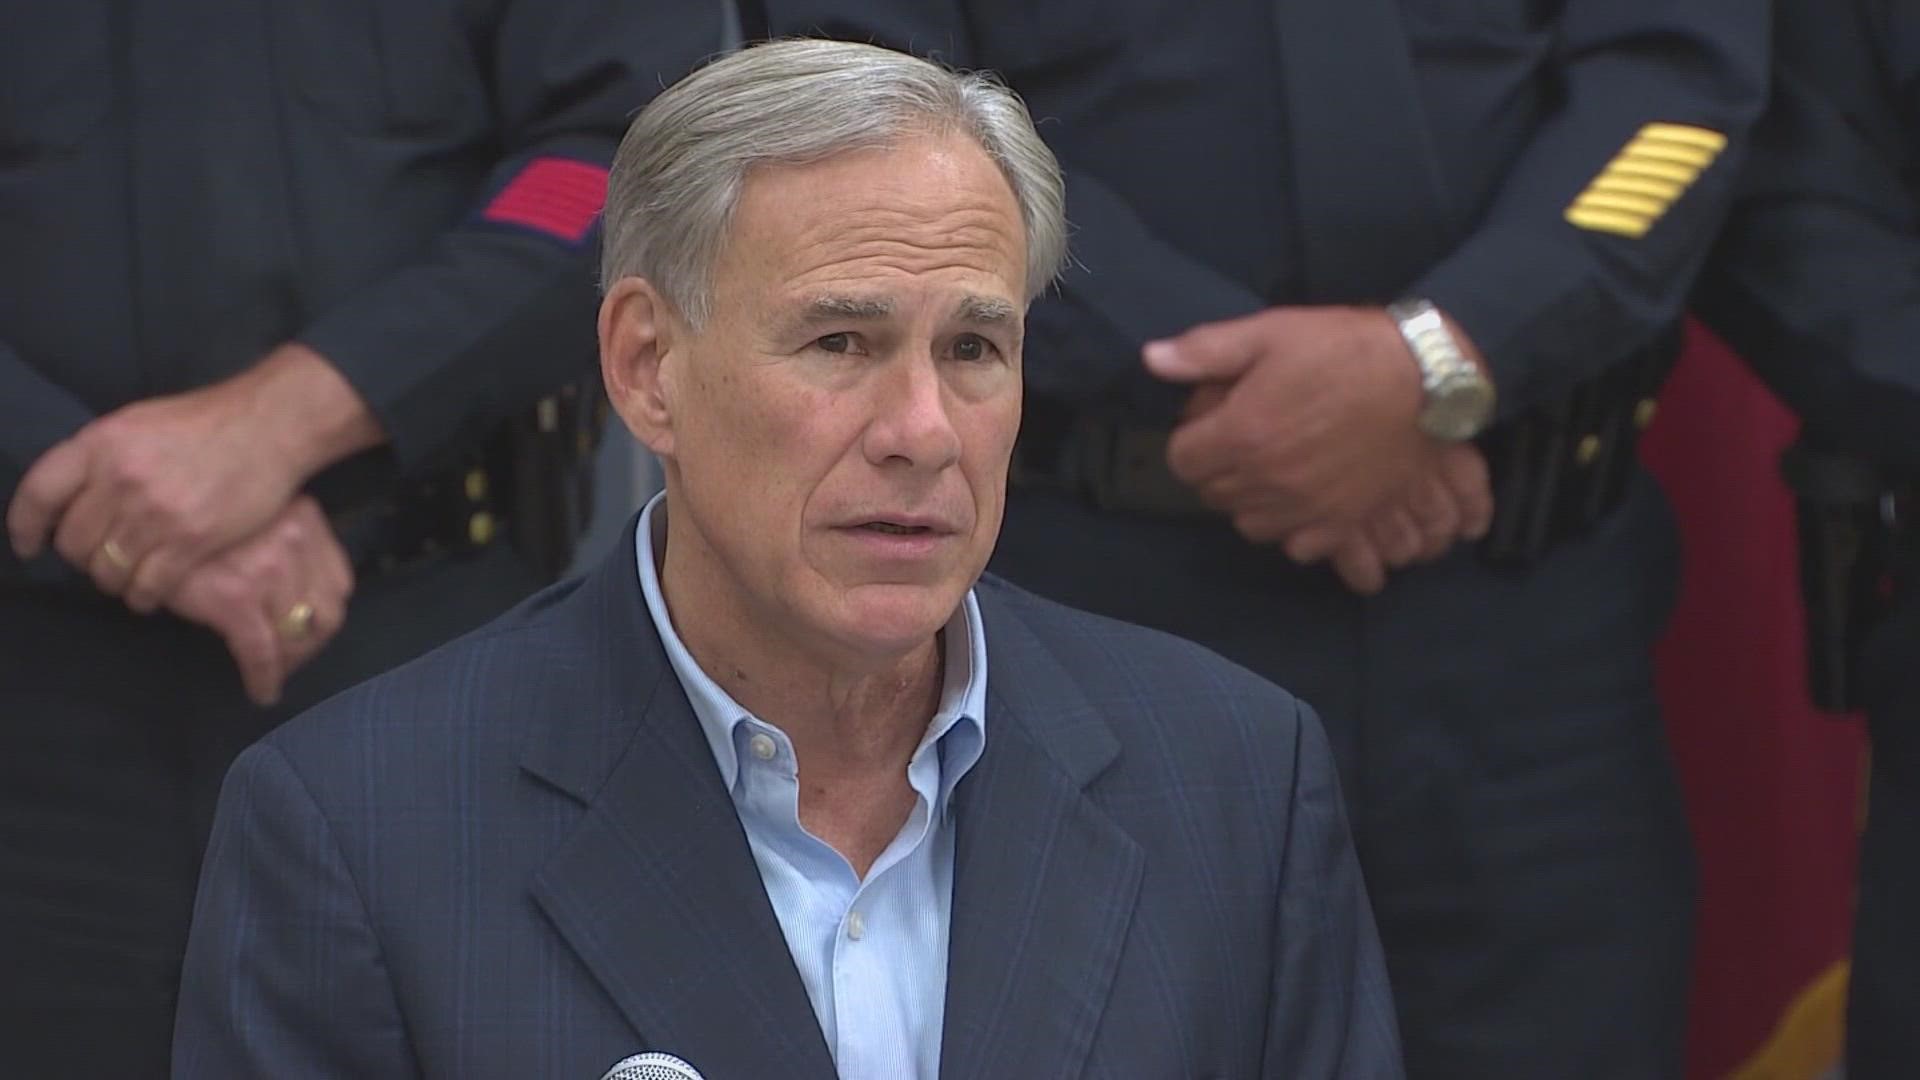 Gov. Abbott holds a slight lead in polling over Beto O'Rourke and he made a campaign stop in Houston to address crime.